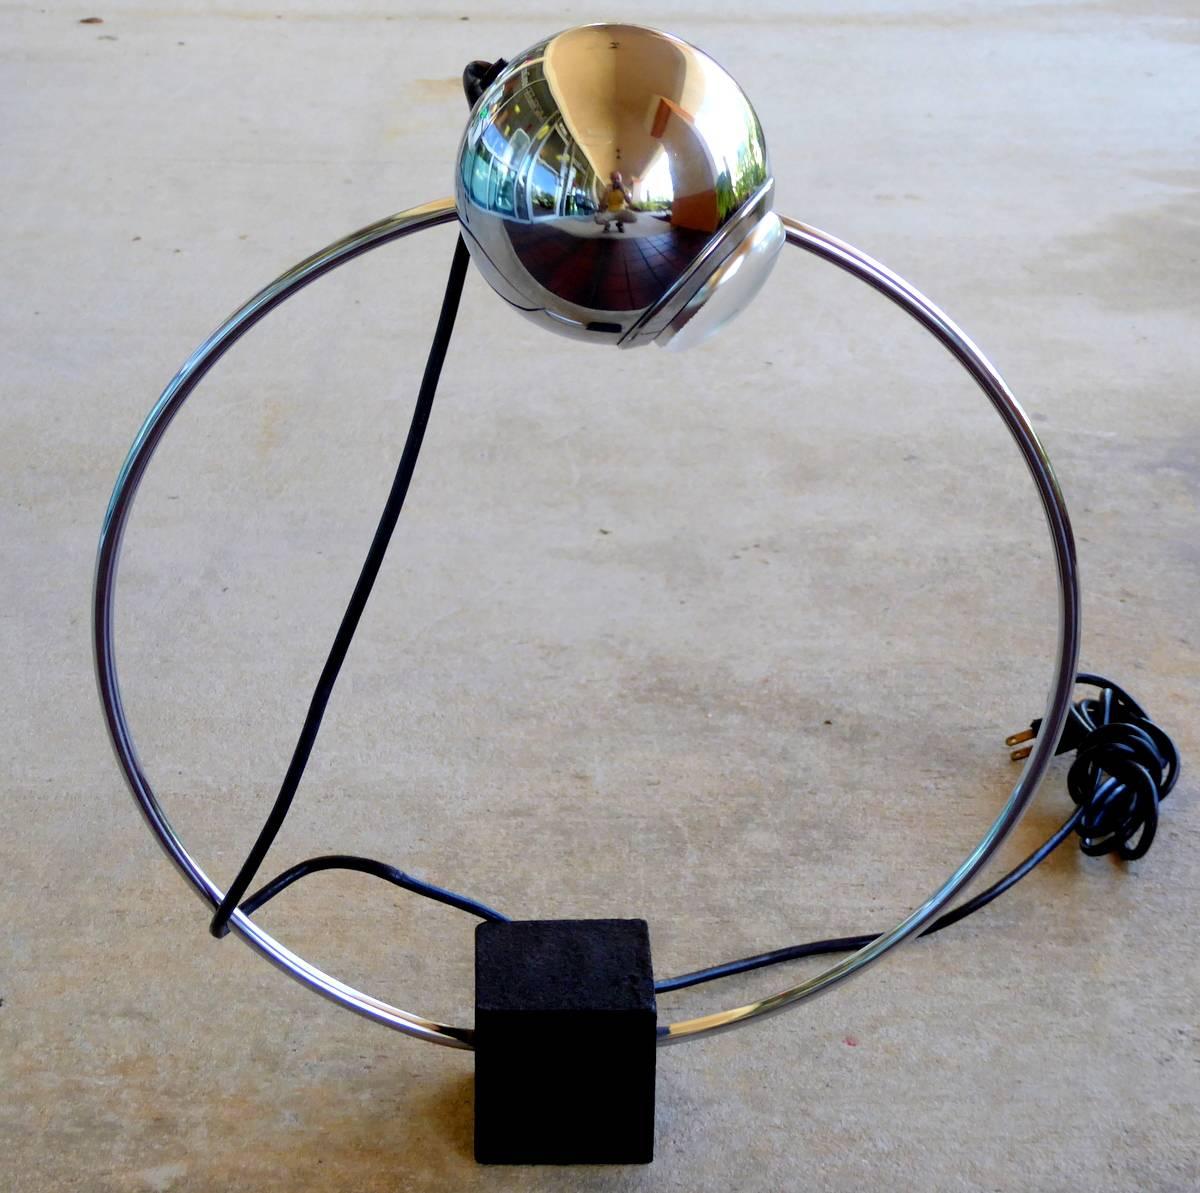 A rare chrome eyeball lamp featuring a heavy base and an orb that swivels and orbits a circular path. In the style of Kovacs, Sonneman, and Koch-Lowy.

A few important notes about all items available through this 1stdibs dealer:

1. We list all our